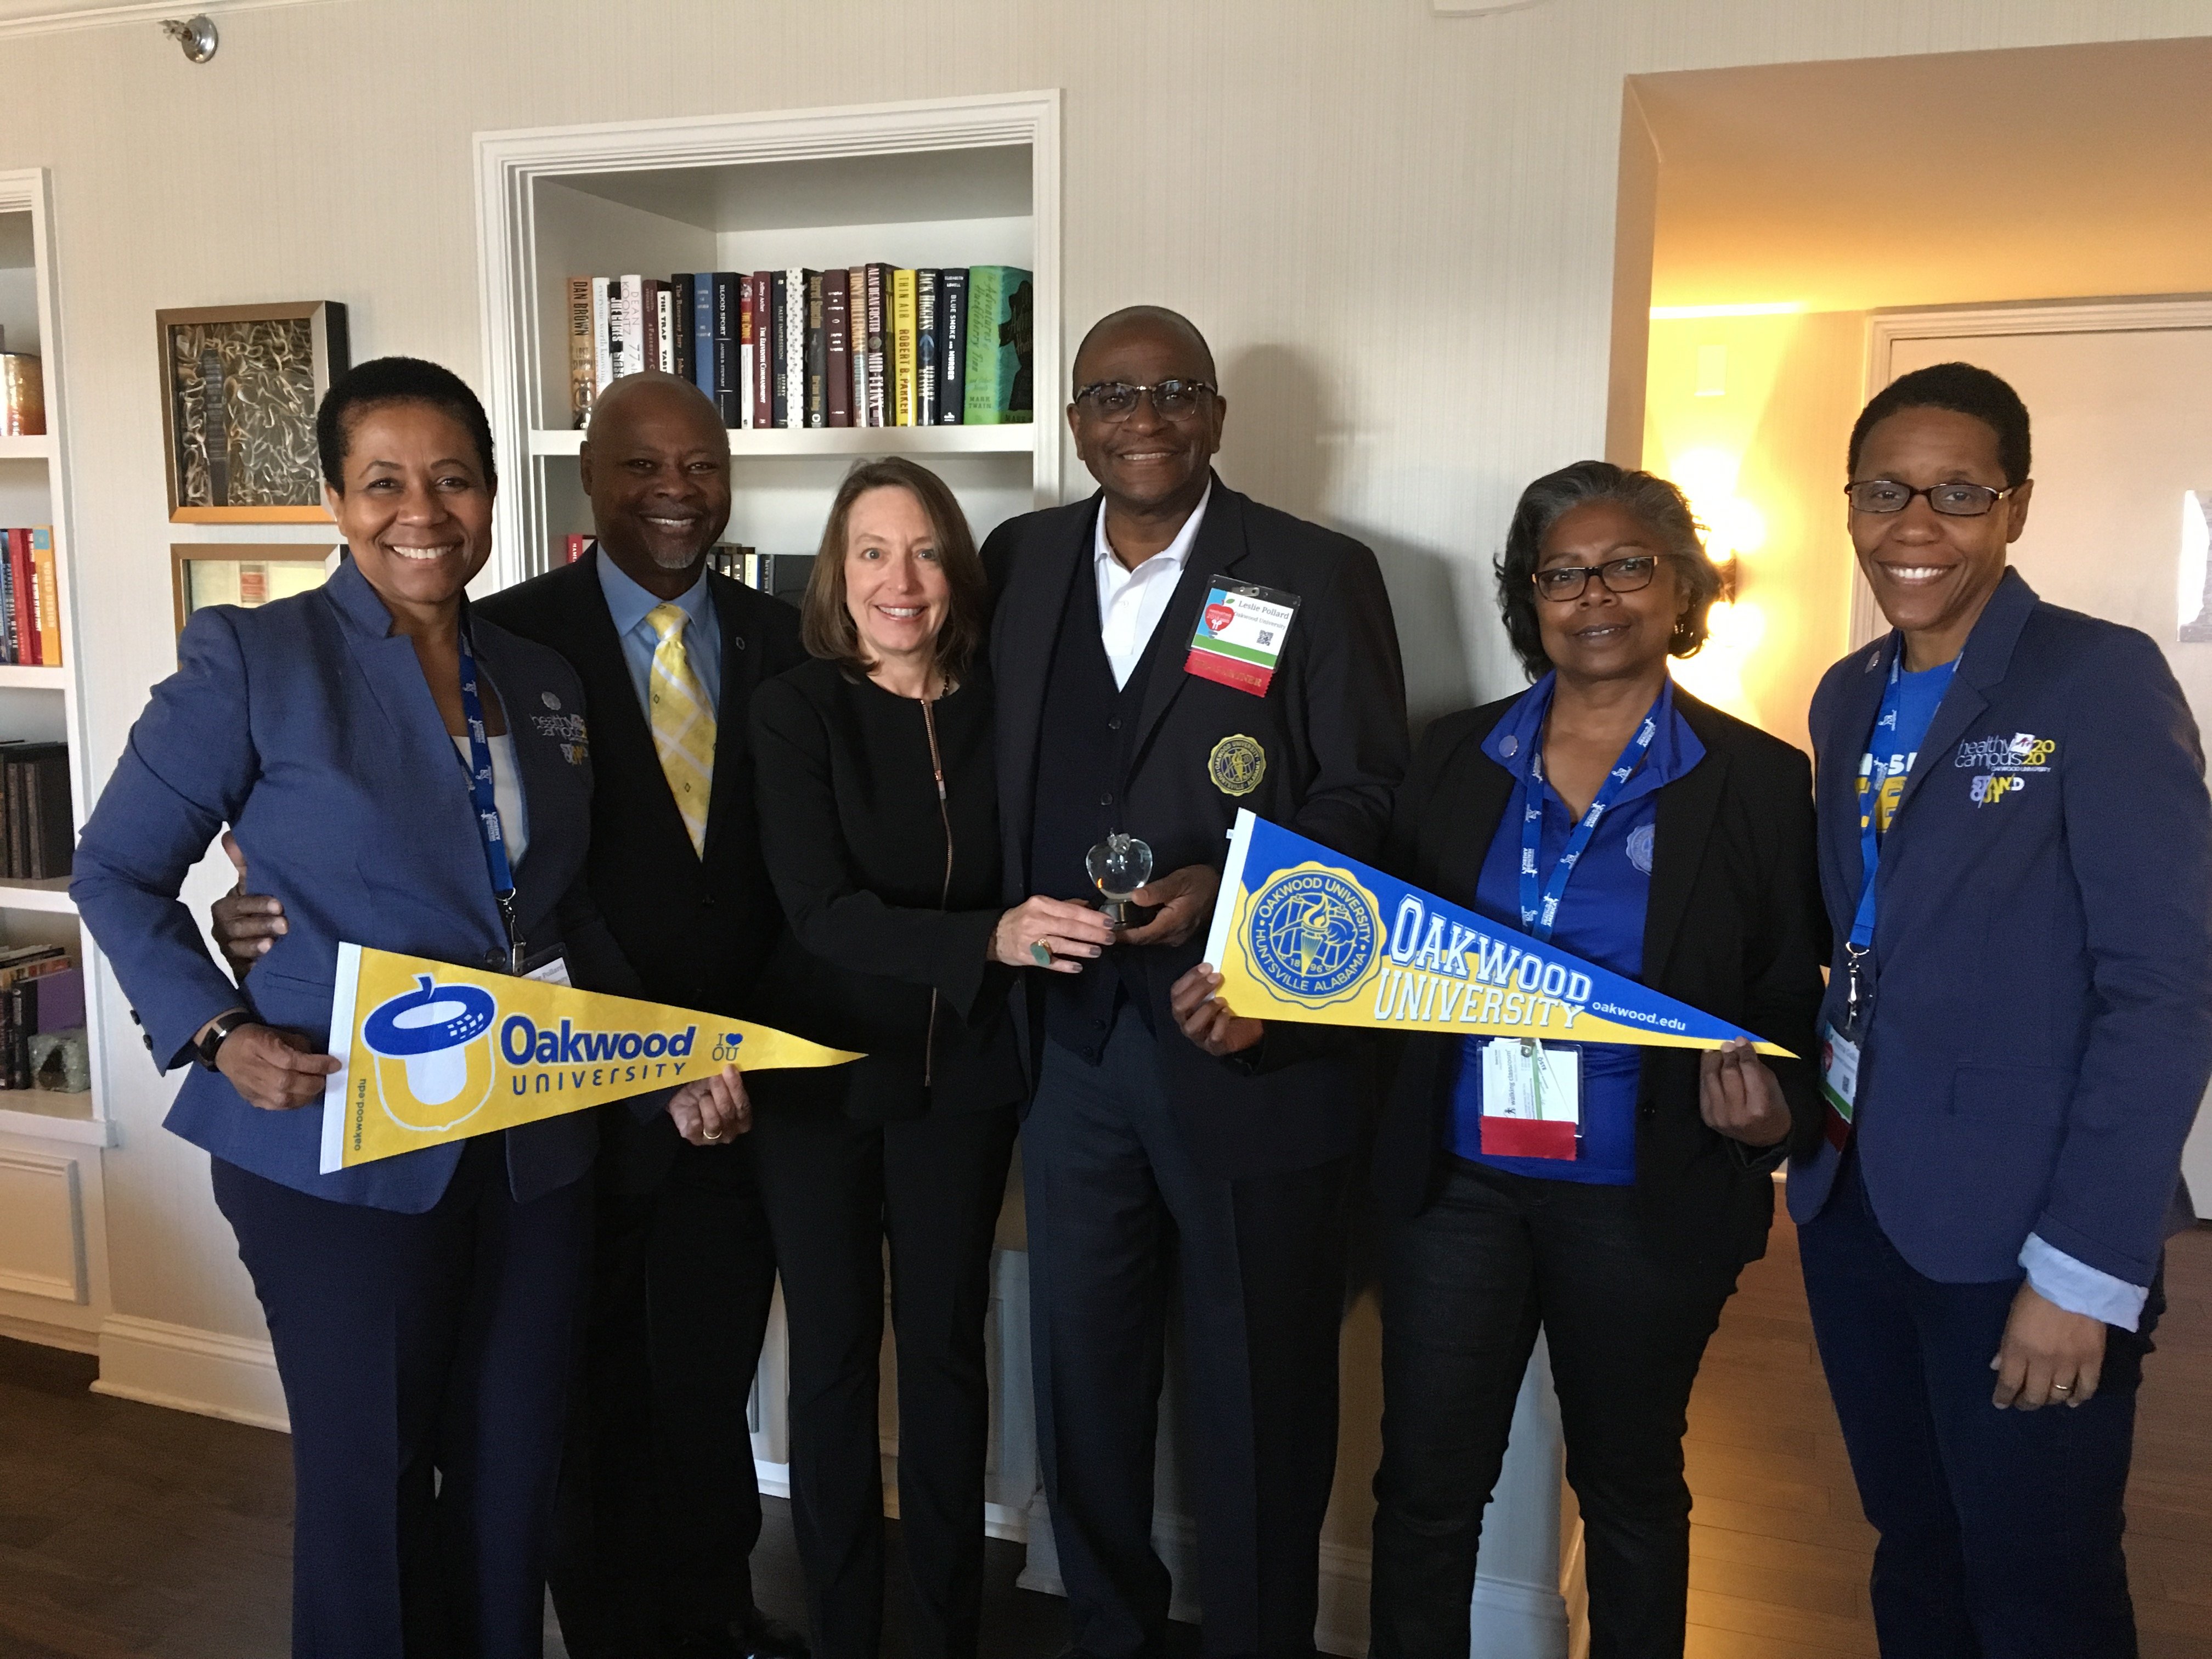 Oakwood University receives recognition for Healthy Campus 2020 initiative